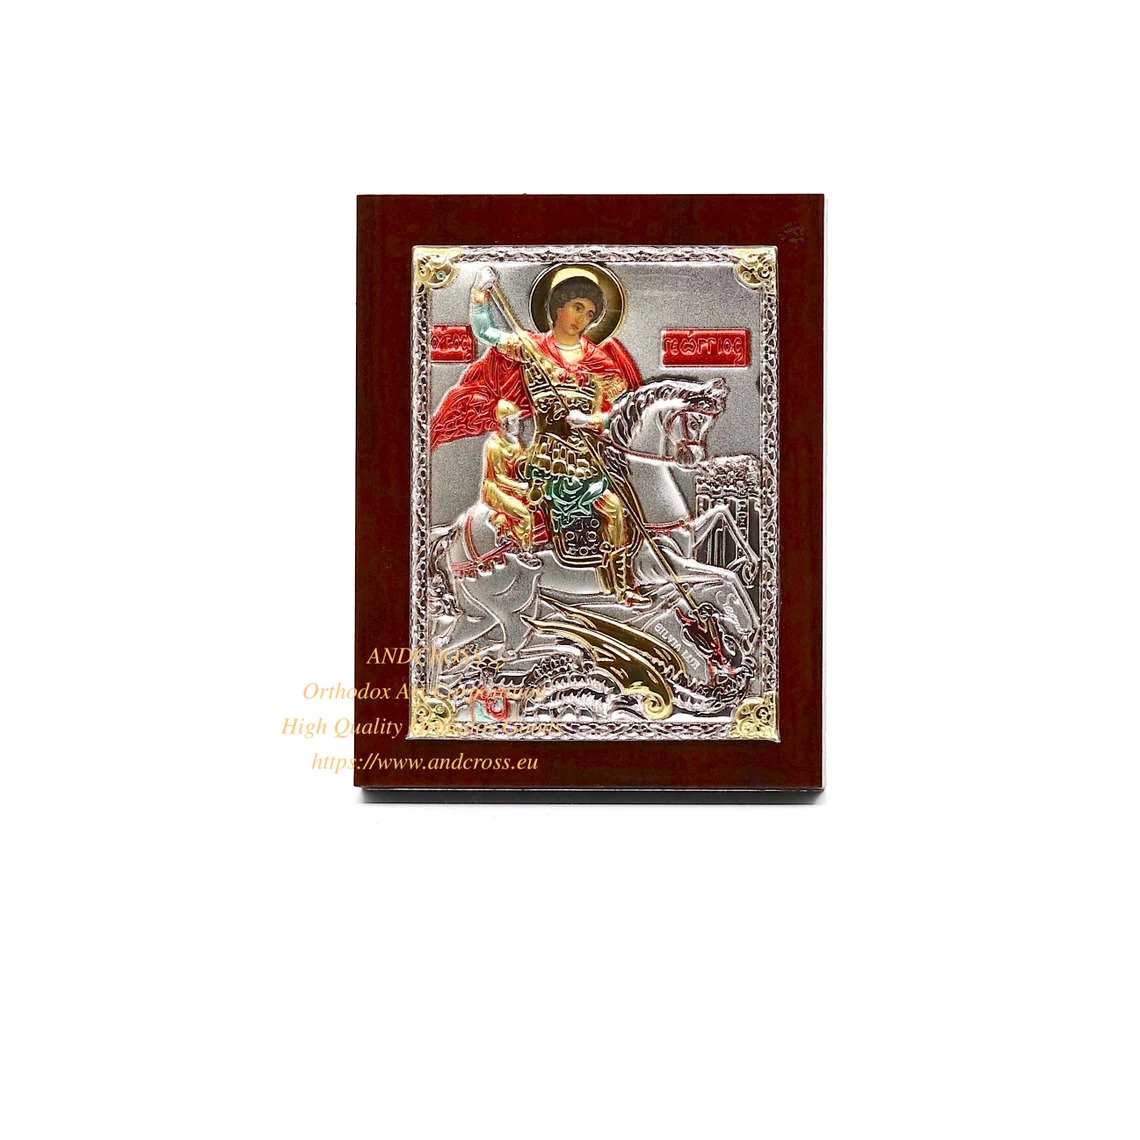 Silver Plated .999 Icon St George Warrior The Victory Bearer. (6.4cm X 5cm). B303|Silver Plated .999 Icon St George Warrior The Victory Bearer. (6.4cm X 5cm). B303|Silver Plated .999 Icon St George Warrior The Victory Bearer. (6.4cm X 5cm). B303|Silver Plated .999 Icon St George Warrior The Victory Bearer. (6.4cm X 5cm). B303|Silver Plated .999 Icon St George Warrior The Victory Bearer. (6.4cm X 5cm). B303|Silver Plated .999 Icon St George Warrior The Victory Bearer. (6.4cm X 5cm). B303